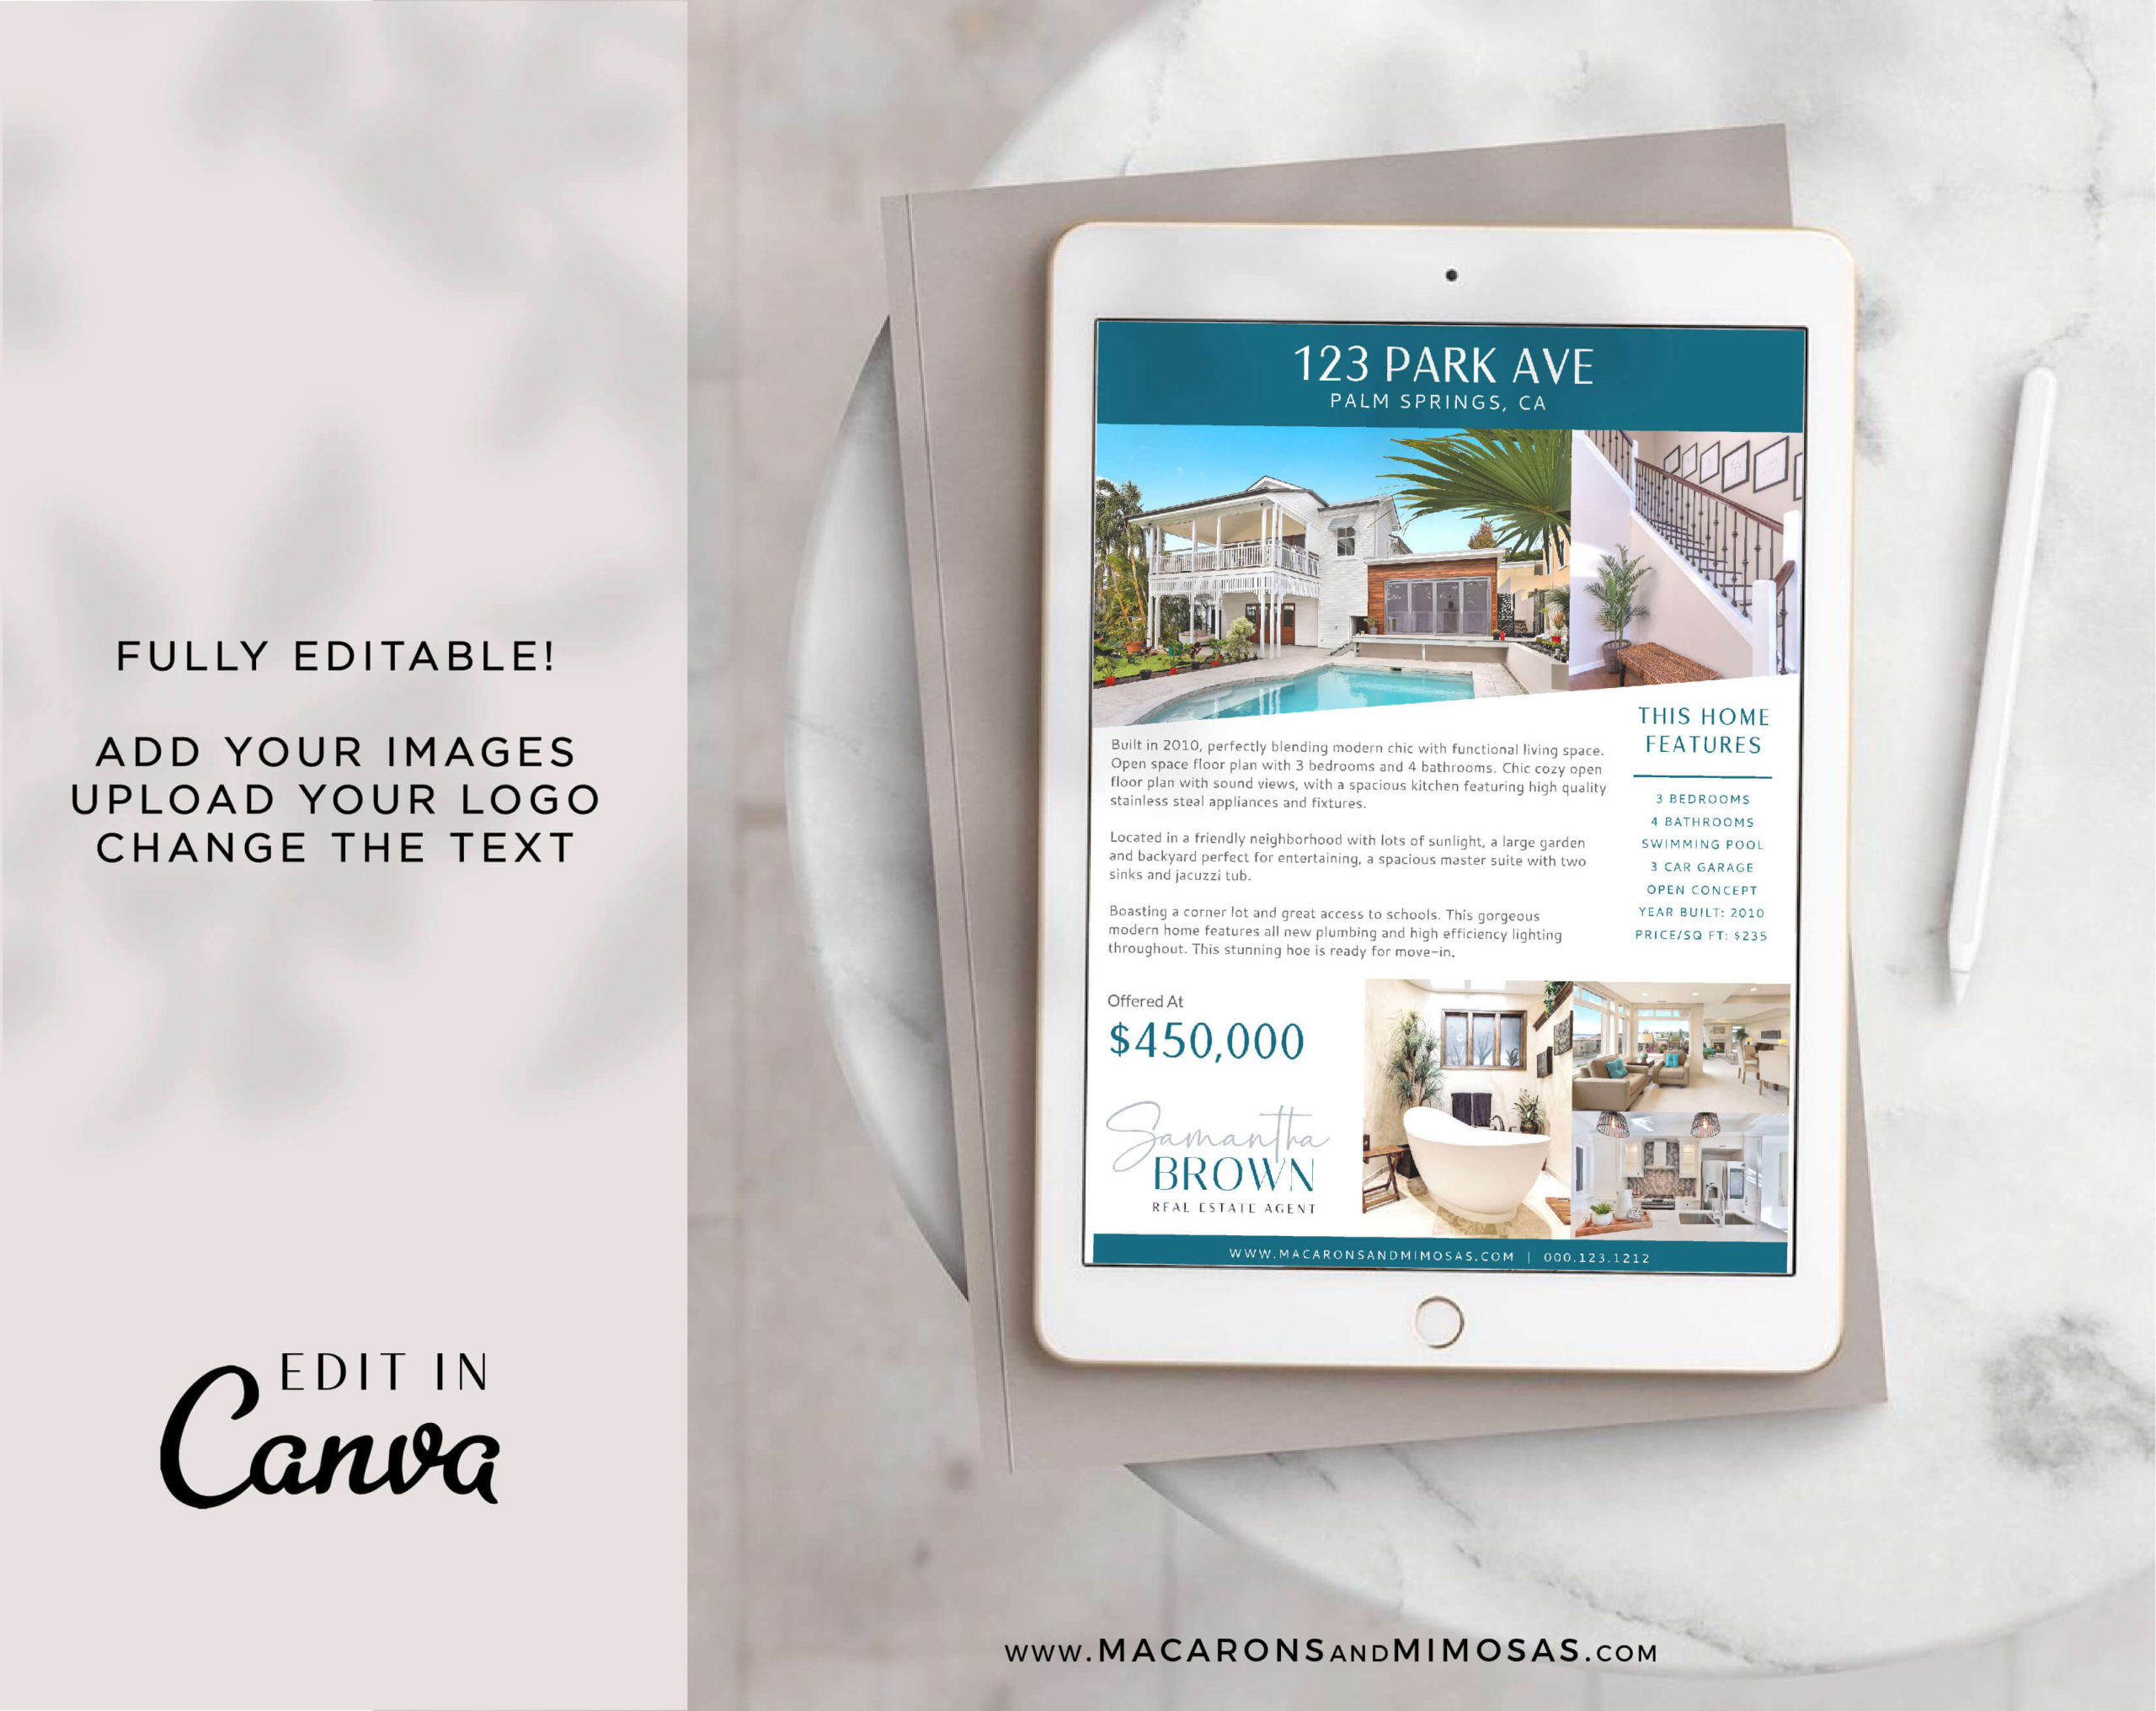 Real Estate Flyer Template, Realty Canva Marketing Open House Listing Design, Just Listed Home Flyer Sheet, House for Sale Template